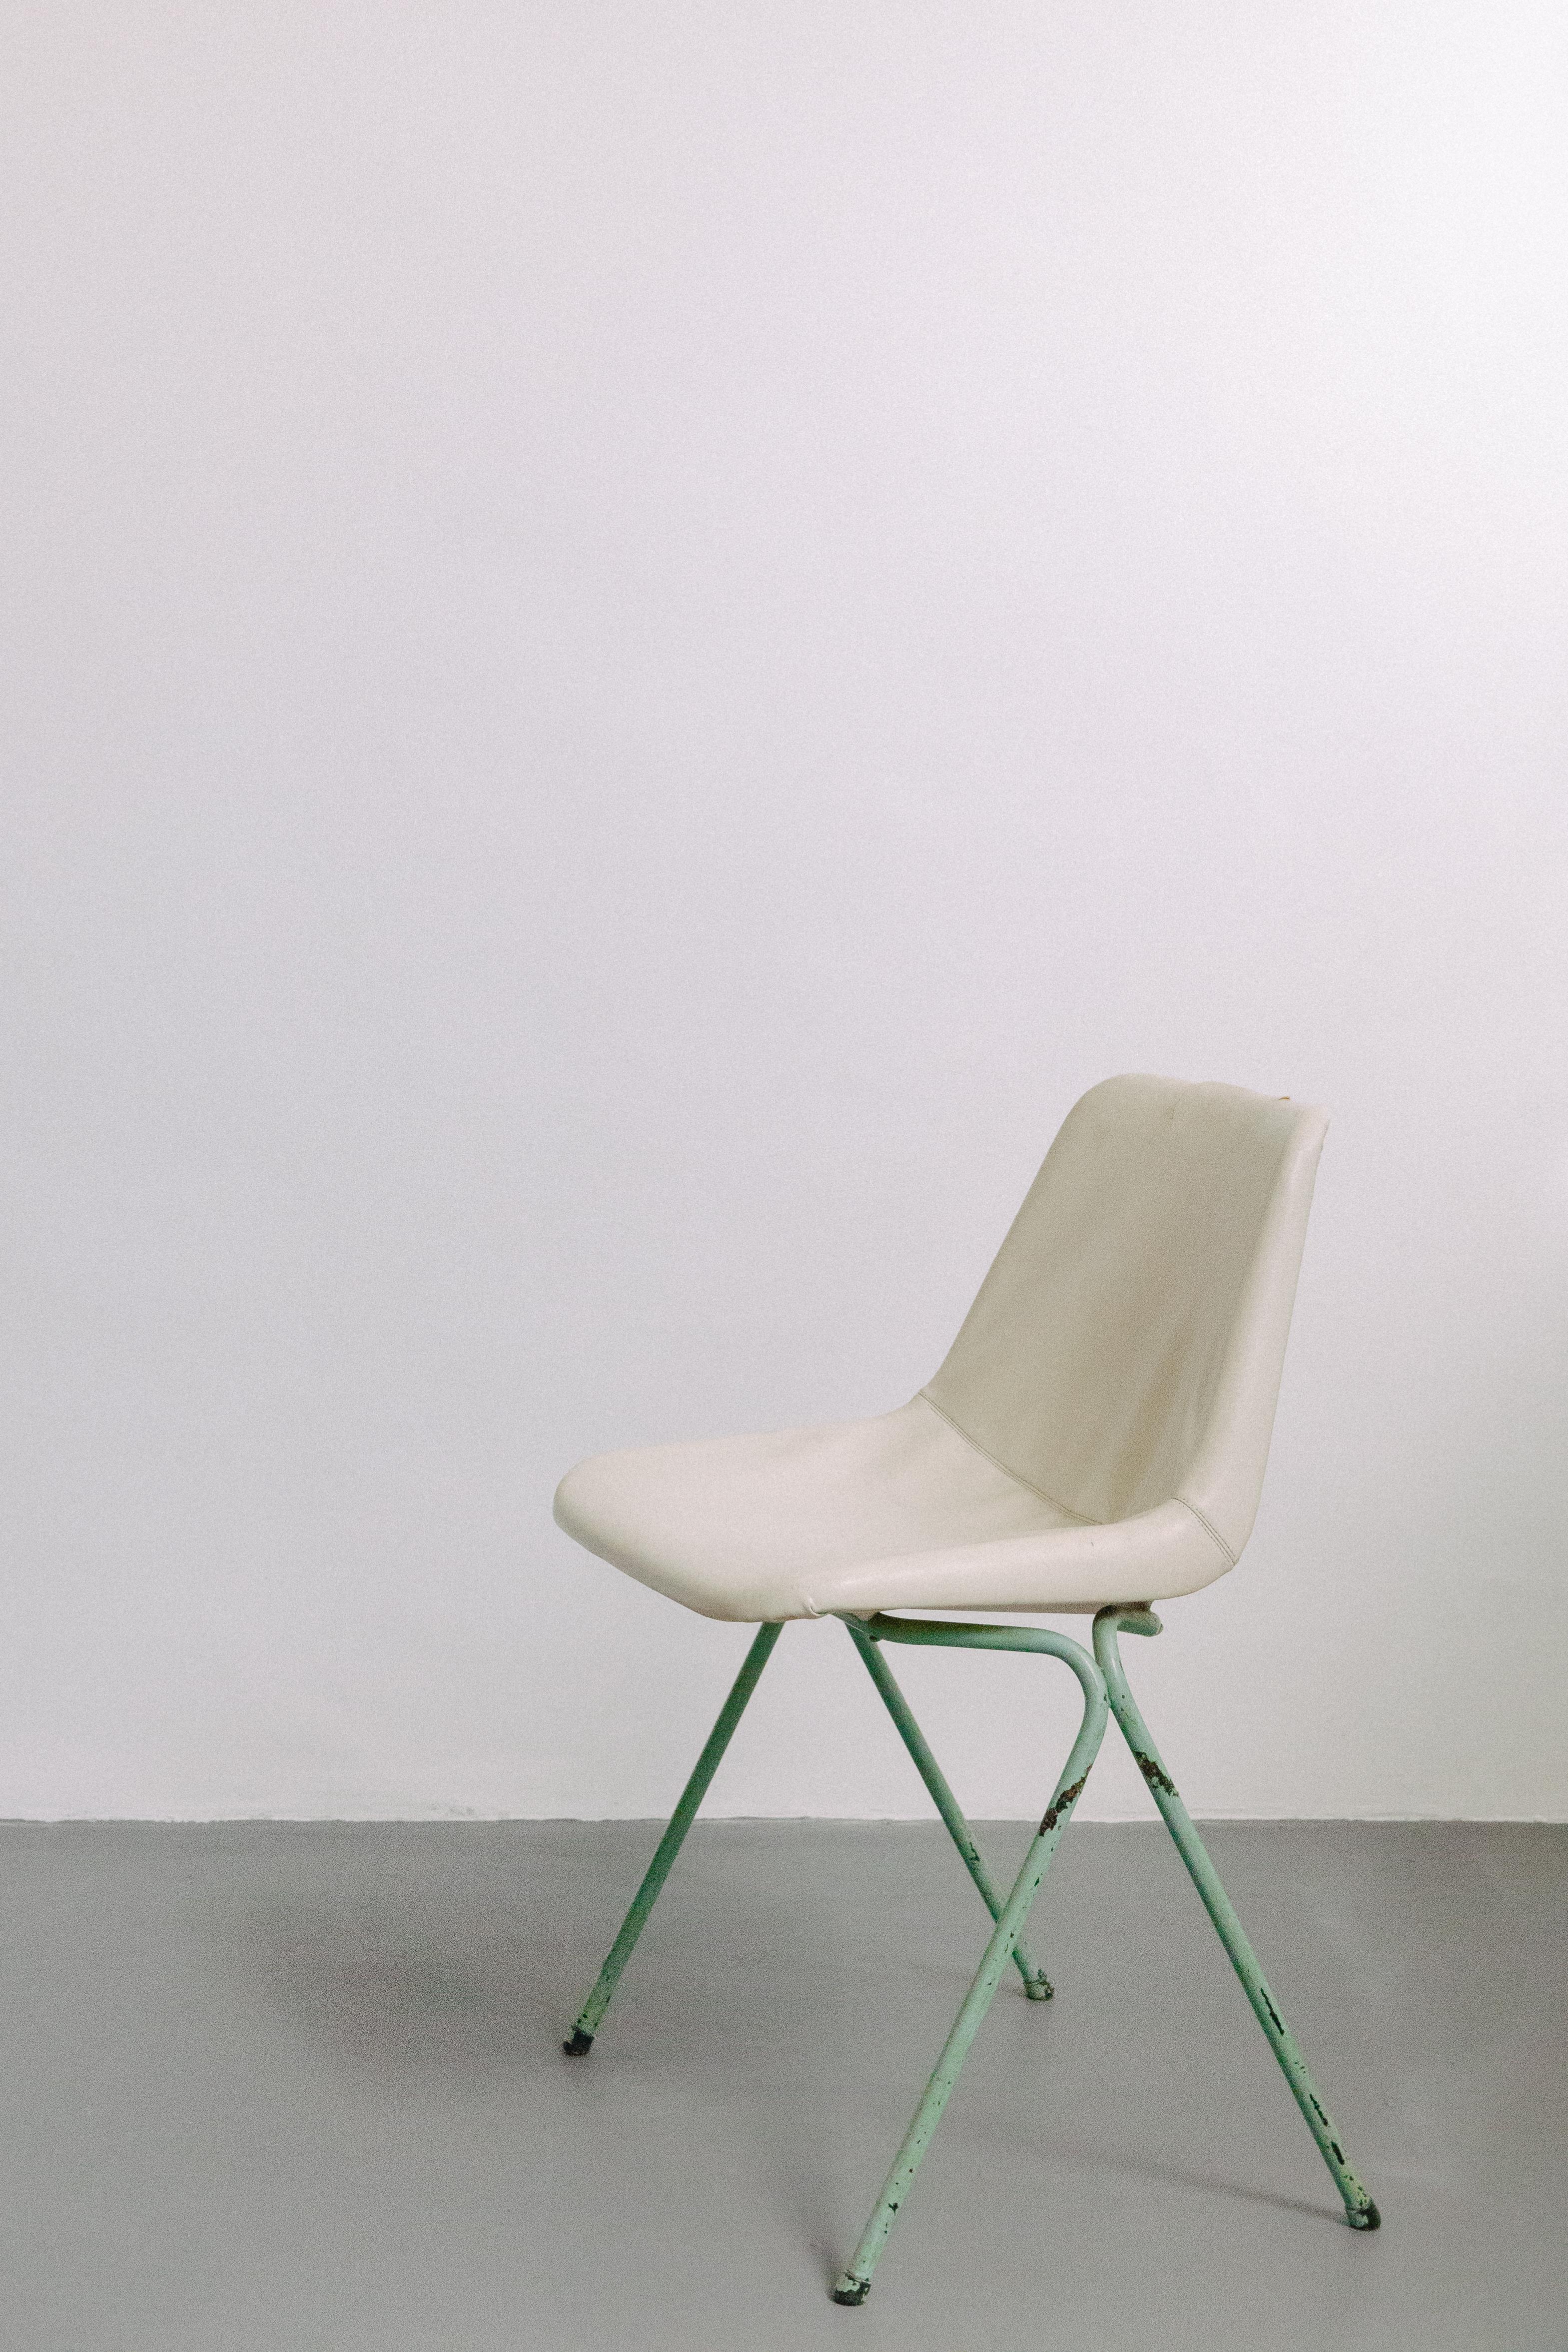 The Polyside chair or Hille chair, as it became known in Brazil, was the first piece to be produced on a large scale by L'Atelier, Jorge Zalszupin's company. 

It was designed by Robin Day for the English furniture manufacturer Hille in 1963 and